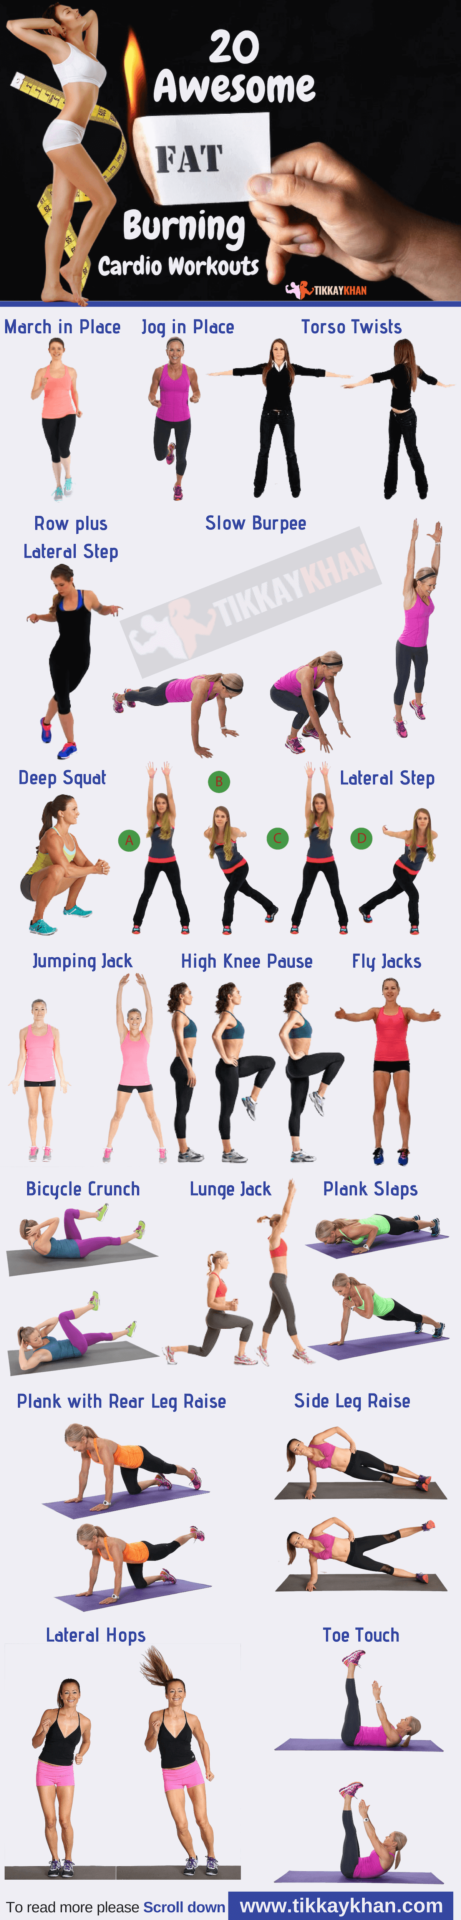 Fat Burning Cardio Workouts Infographic